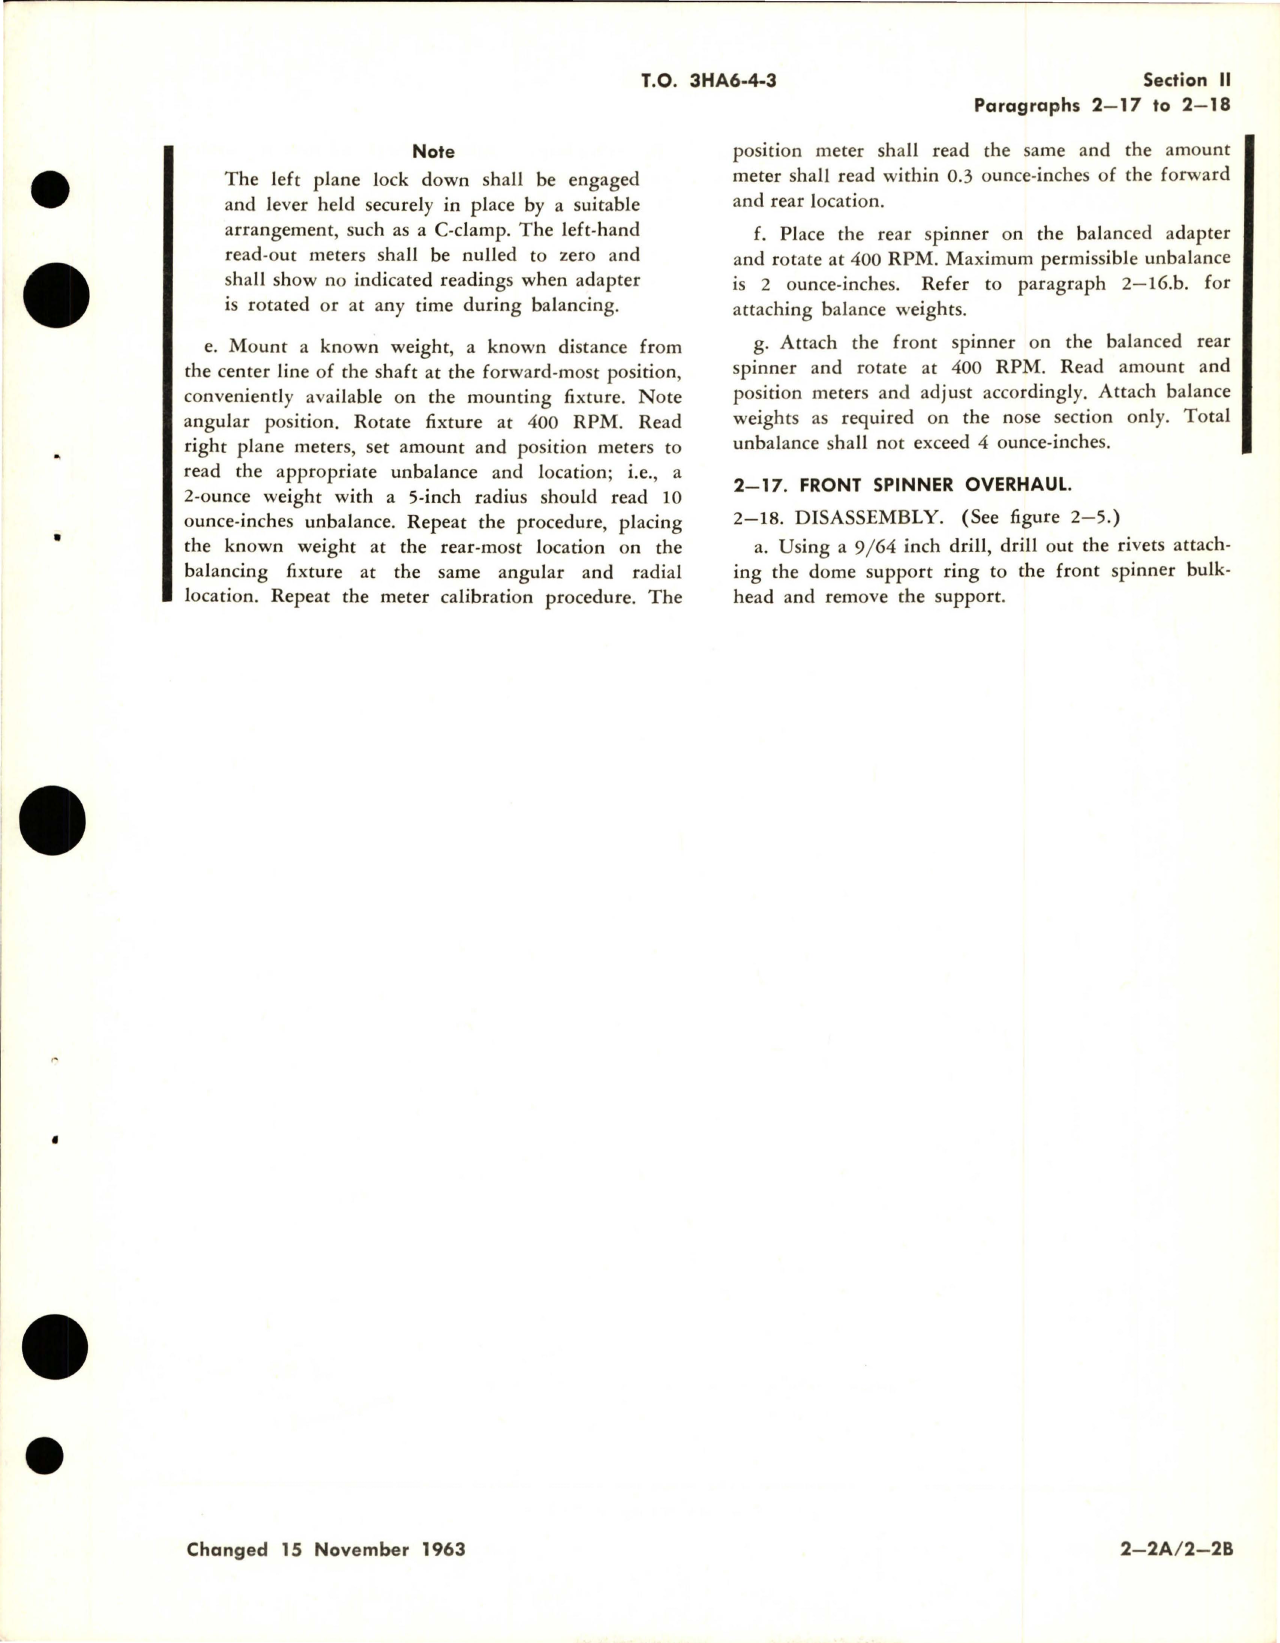 Sample page 9 from AirCorps Library document: Overhaul Instructions for Aircraft Propeller Spinner and Anti-Icing - Part 557615 